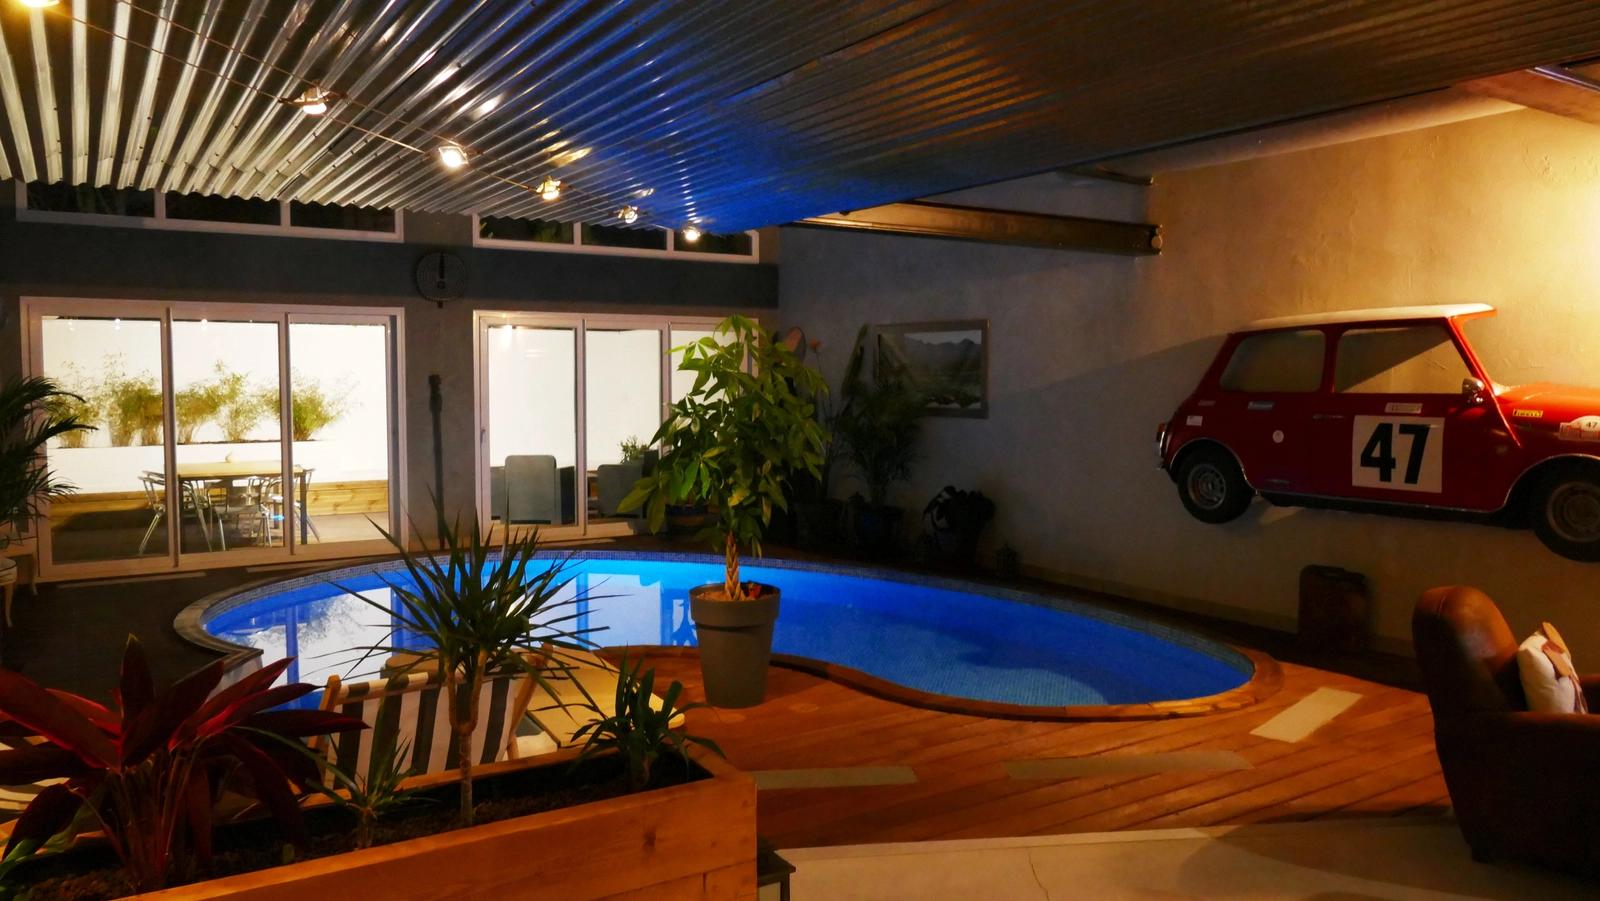 Space Loft with indoor pool - 4